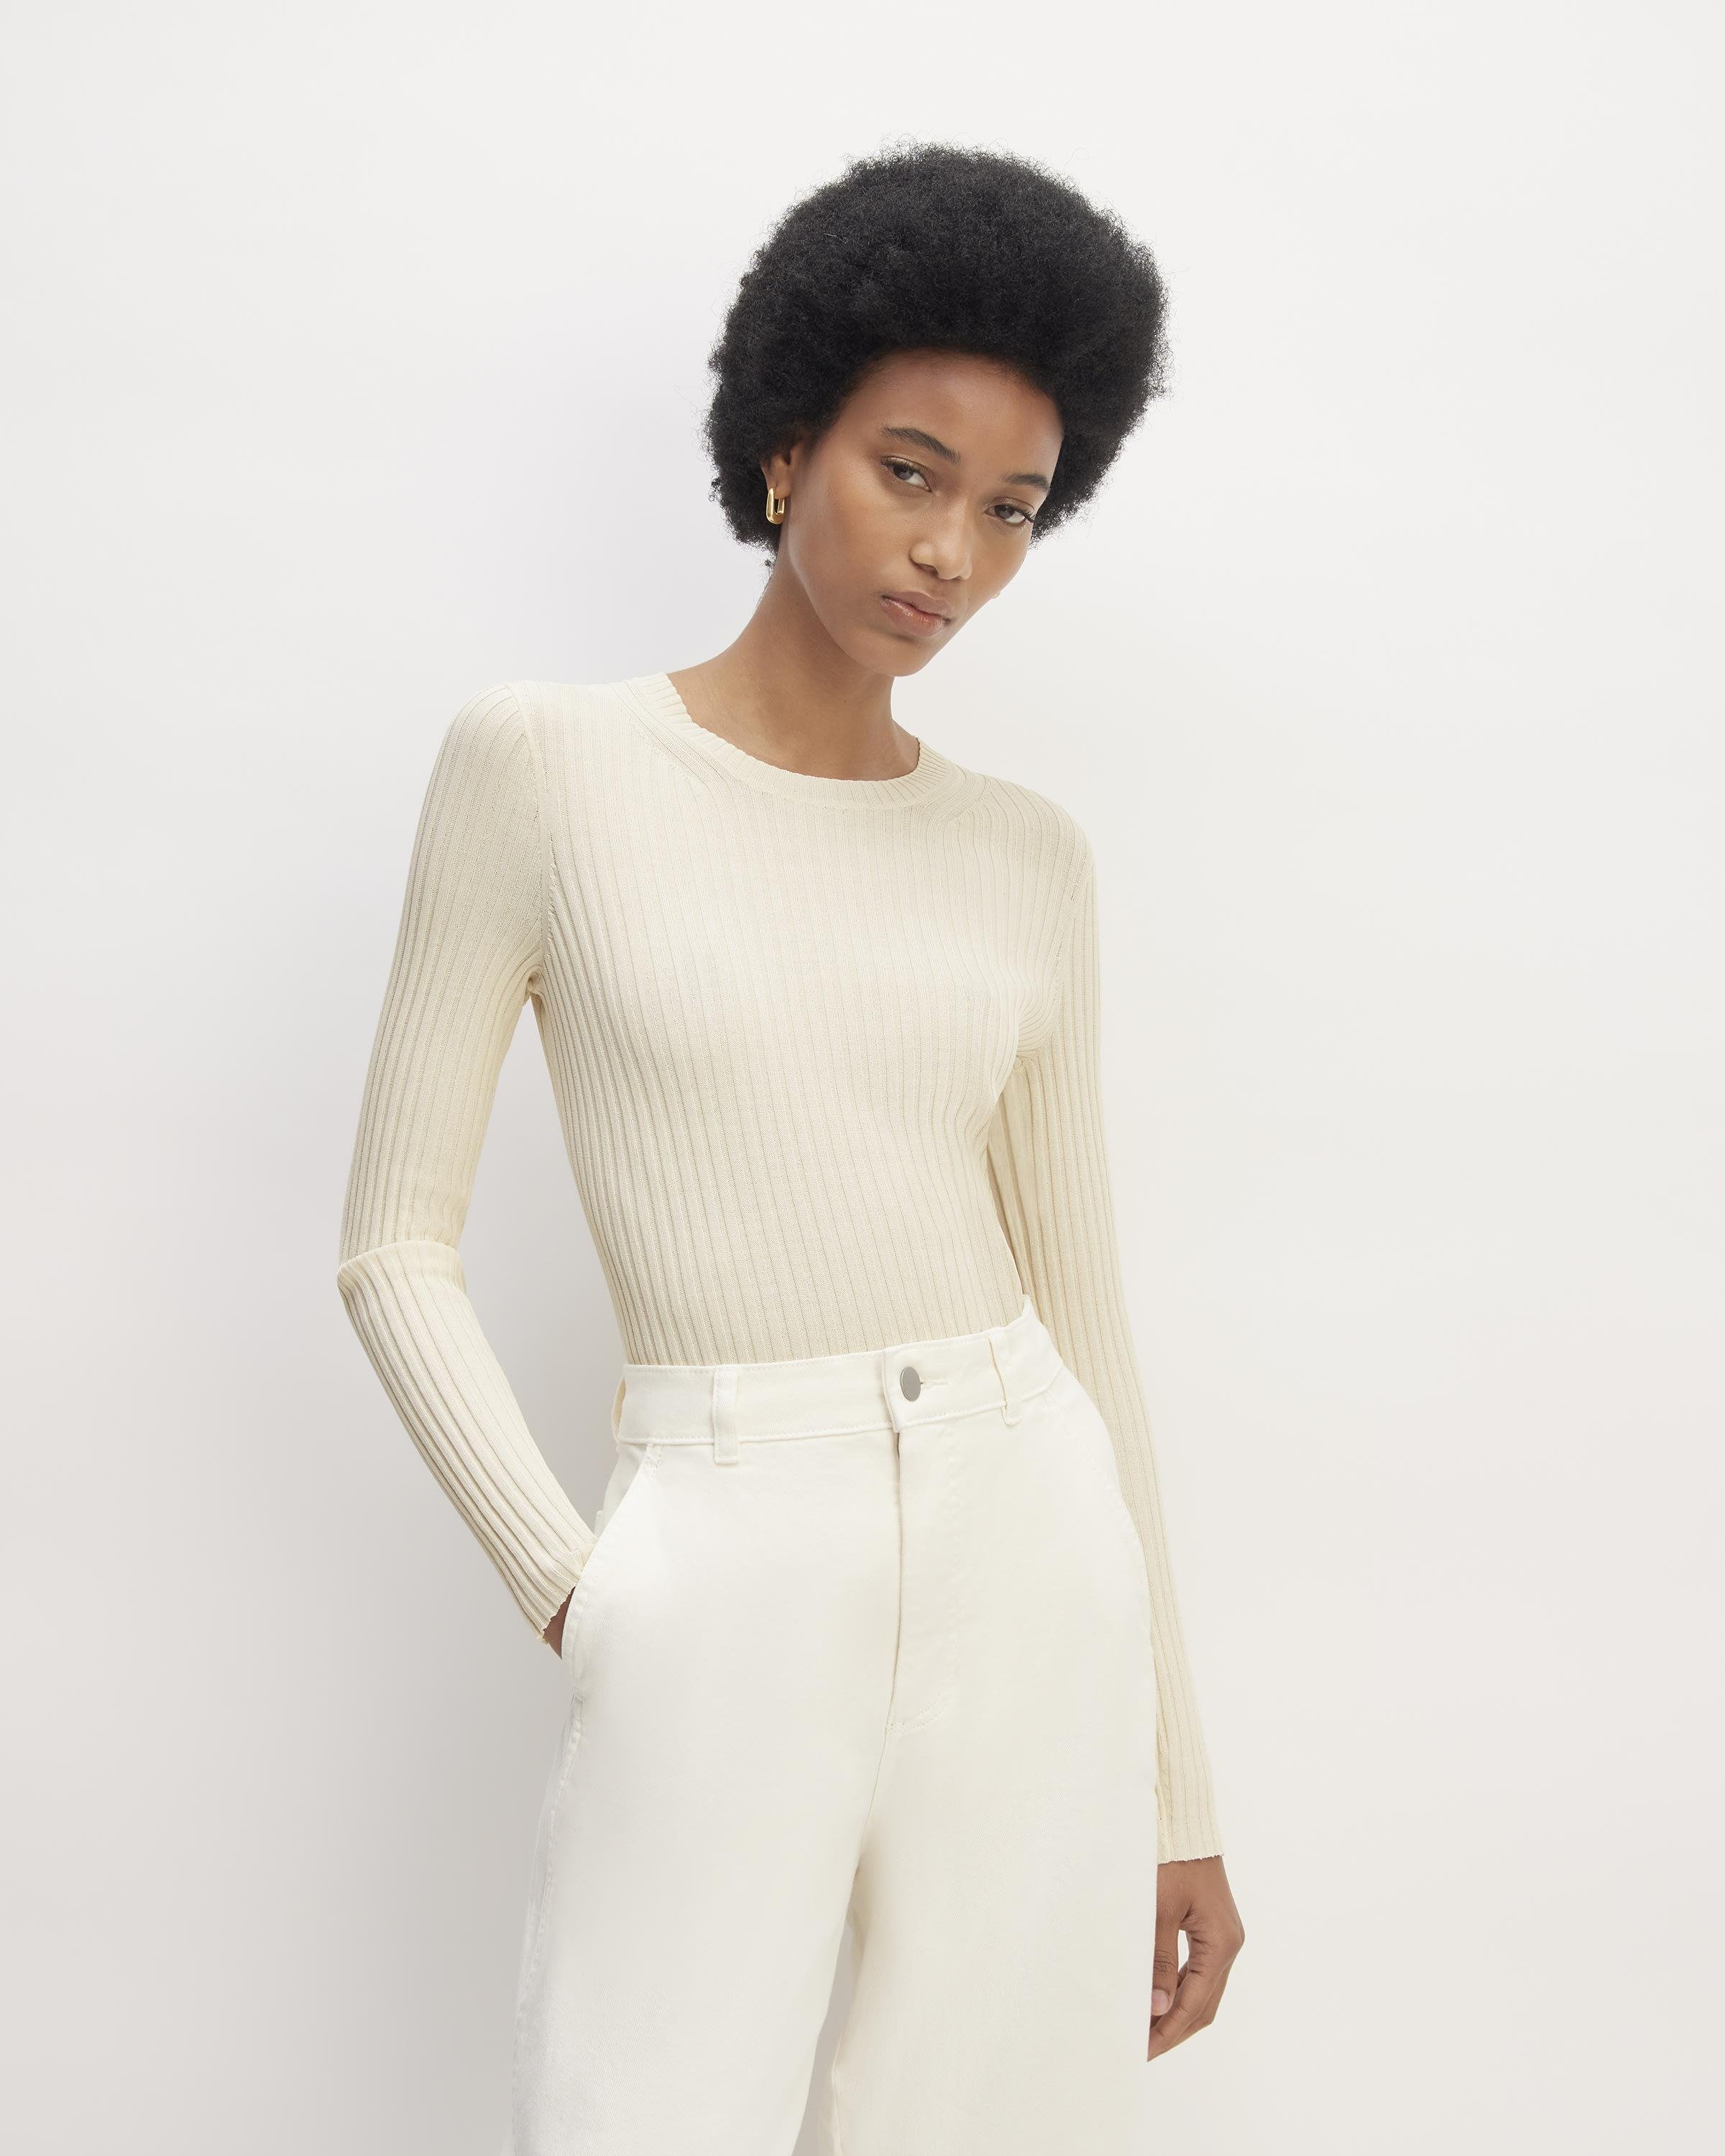 The Viscose Knit Crew by EVERLANE